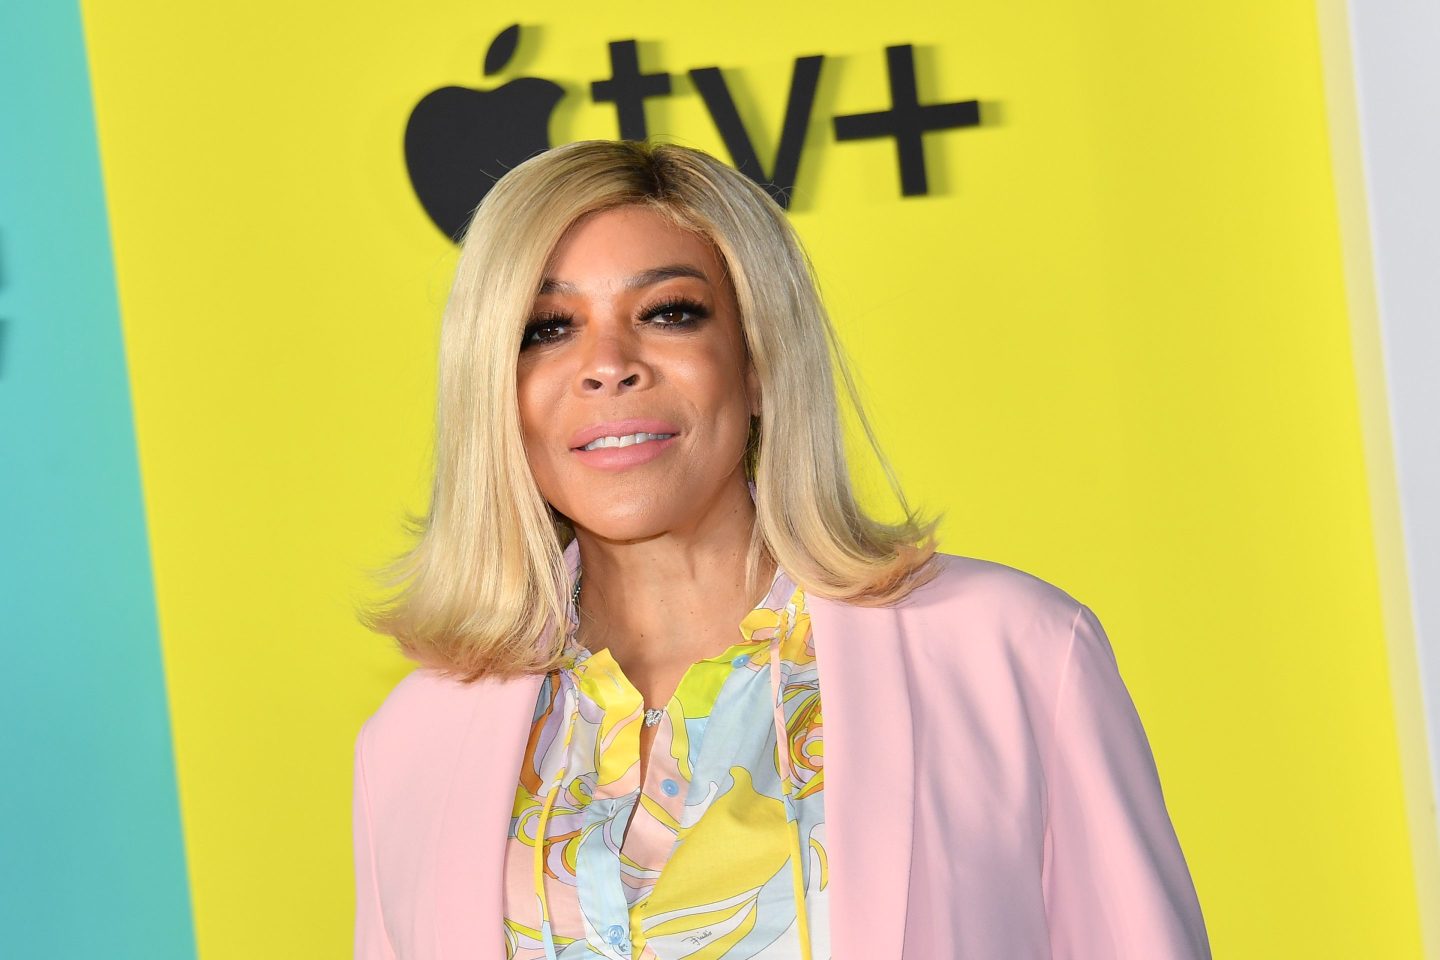 US television presenter Wendy Williams arrives for Apples "The Morning Show" global premiere at Lincoln Center- David Geffen Hall on October 28, 2019 in New York. (Photo by ANGELA WEISS / AFP) (Photo by ANGELA WEISS/AFP via Getty Images)